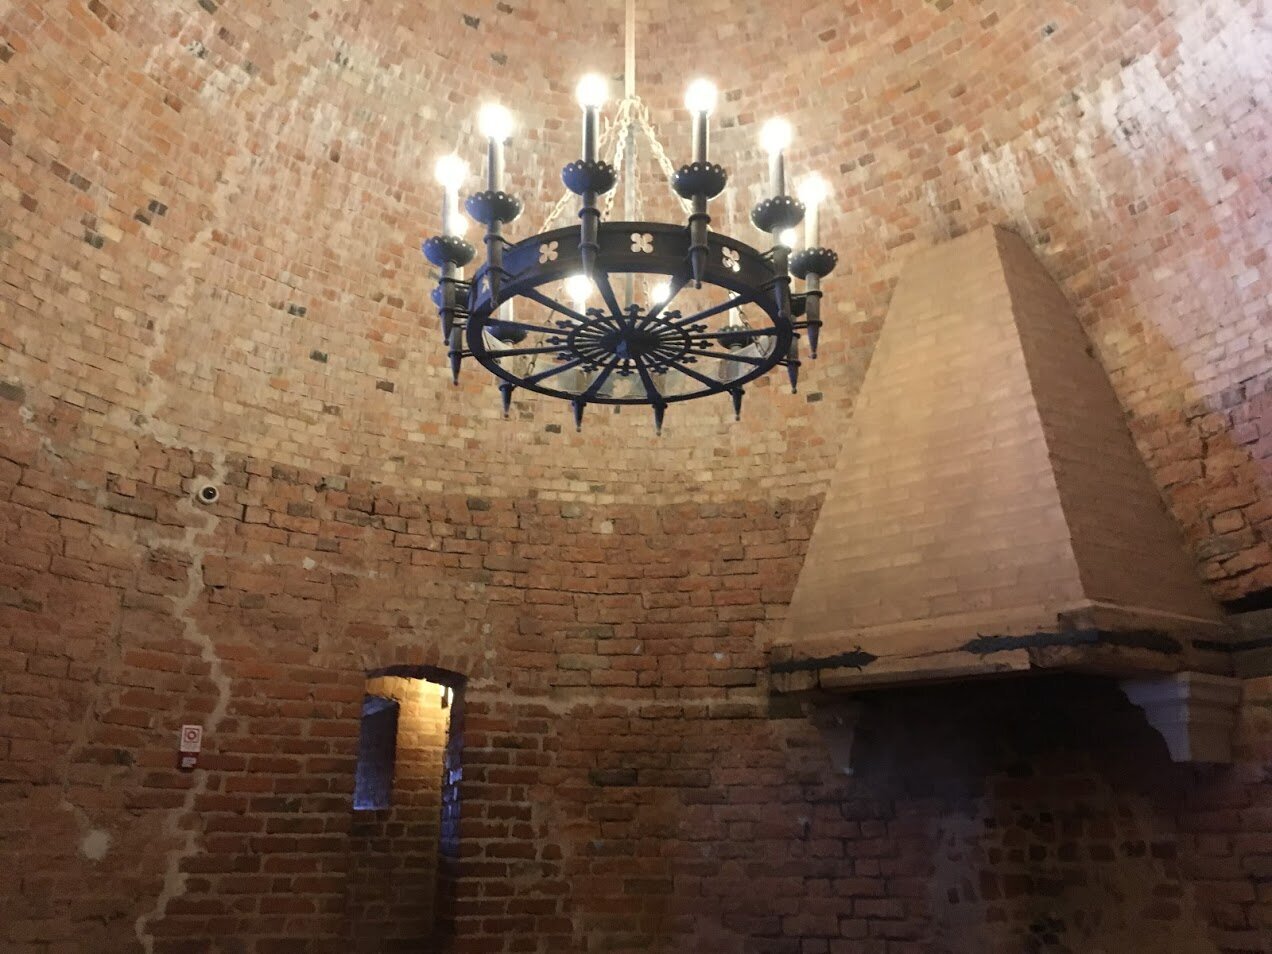 Renovation of the large chandelier and fireplace in the tower